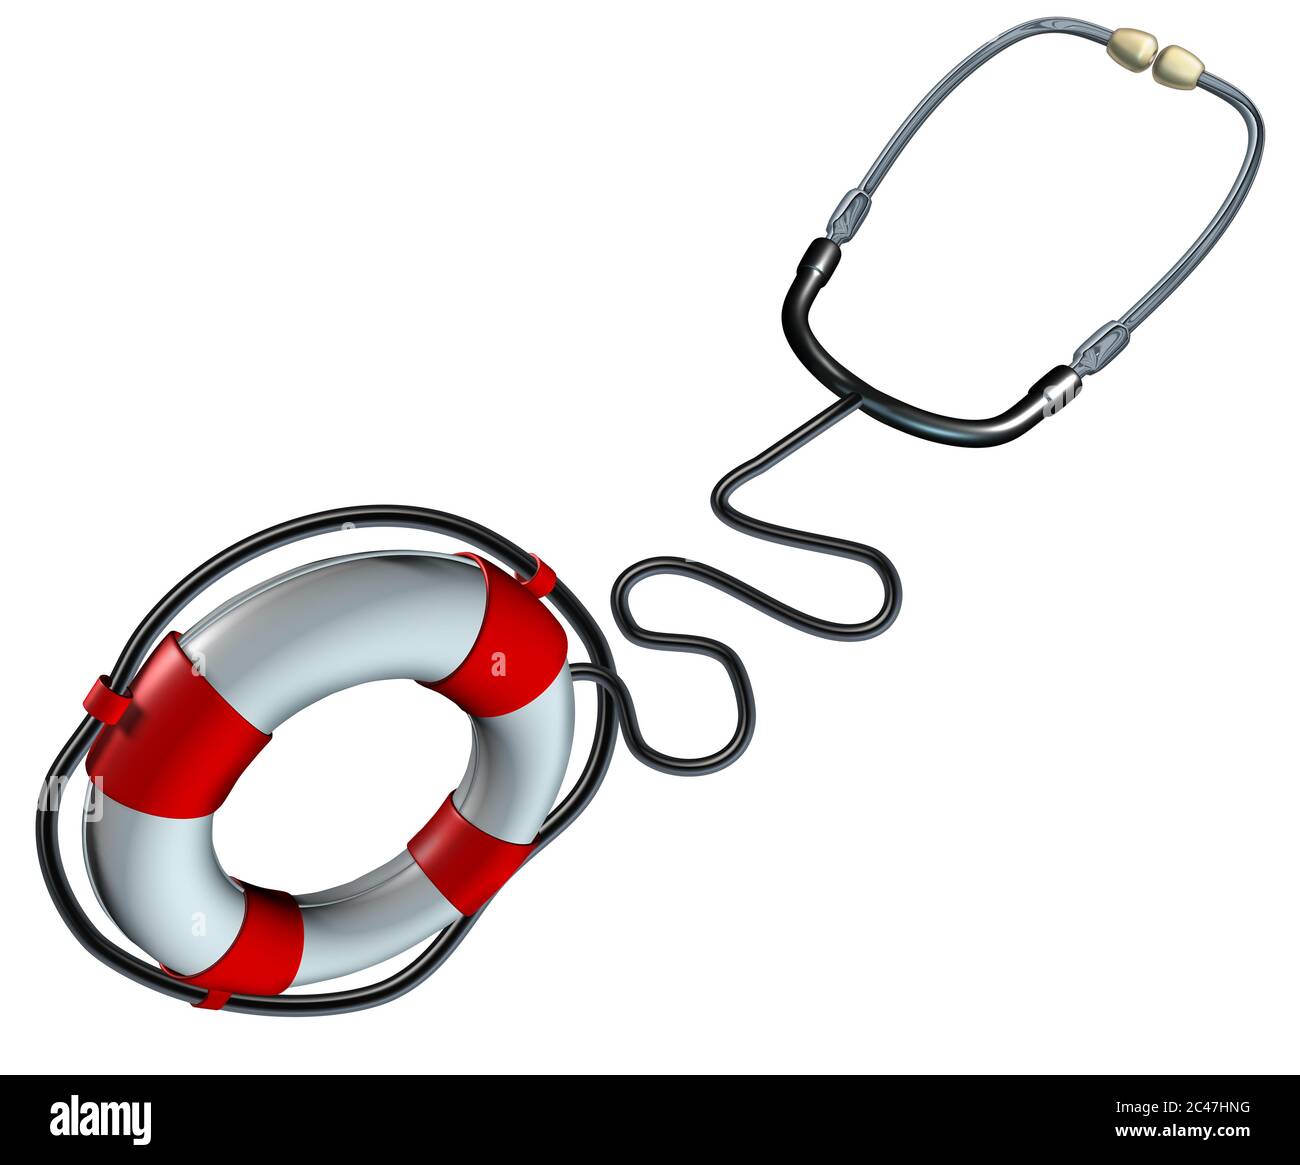 Medical help symbol and health care insurance iconas a stethoscope shaped as a lifesaver or life saver hospital and medicine treatment and therapy. Stock Photo